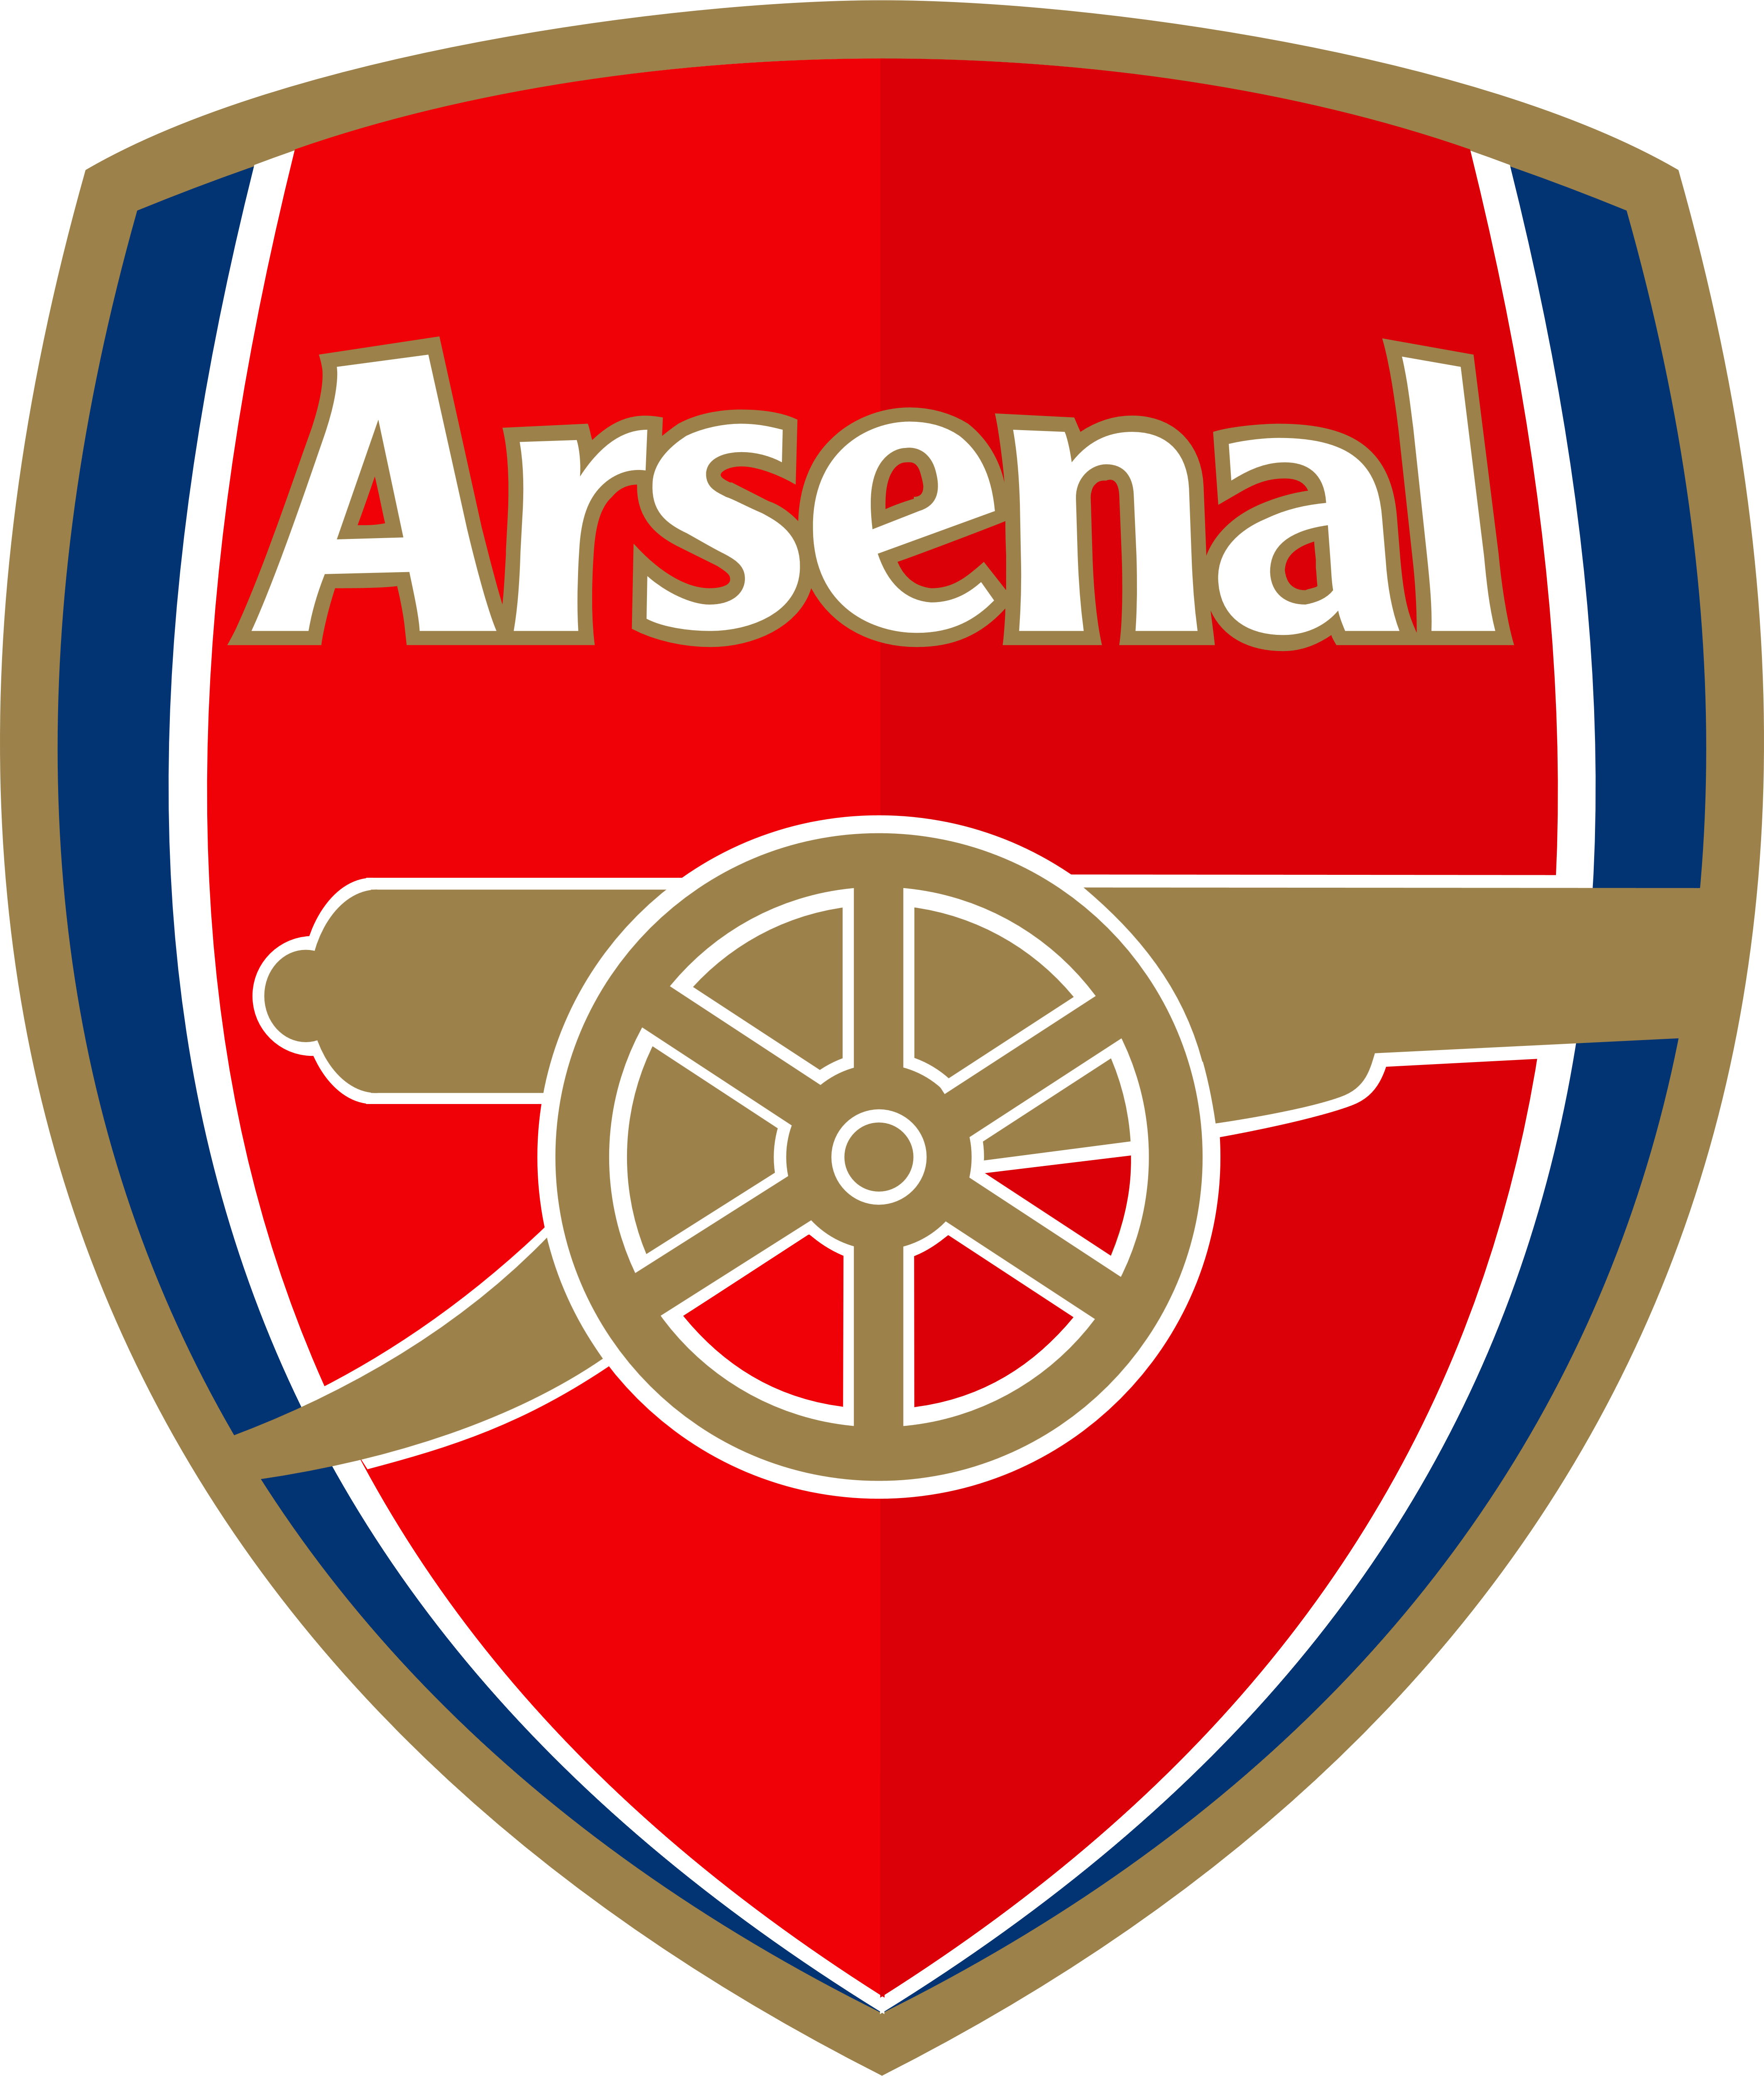 Arsenal To Sack 55 Staff As COVID-19 Hits Revenues